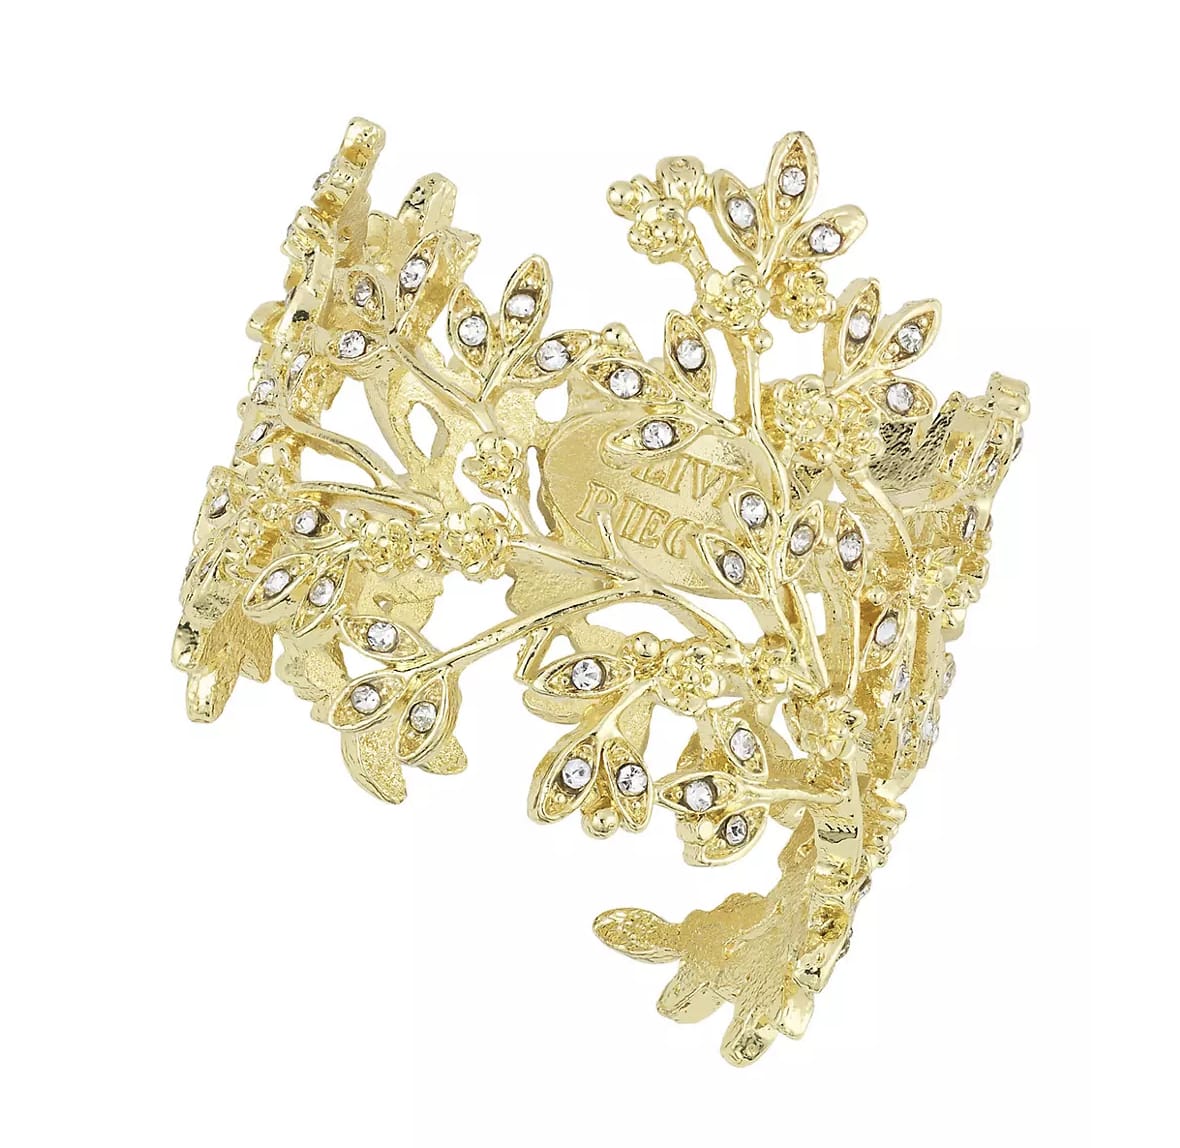 Olivia Riegel sadora Napkin Ring (Set of 4) - Contemporary intricate gold finished pewter branch pattern, adorned with hand-set clear European crystals. Tarnish resistant. Set of 4 napkin rings presented in signature luxury gift box.  Dimensions: 1.75&quot;Dia x 1.75&quot;H Weight: 0.45 lb (includes gift box).